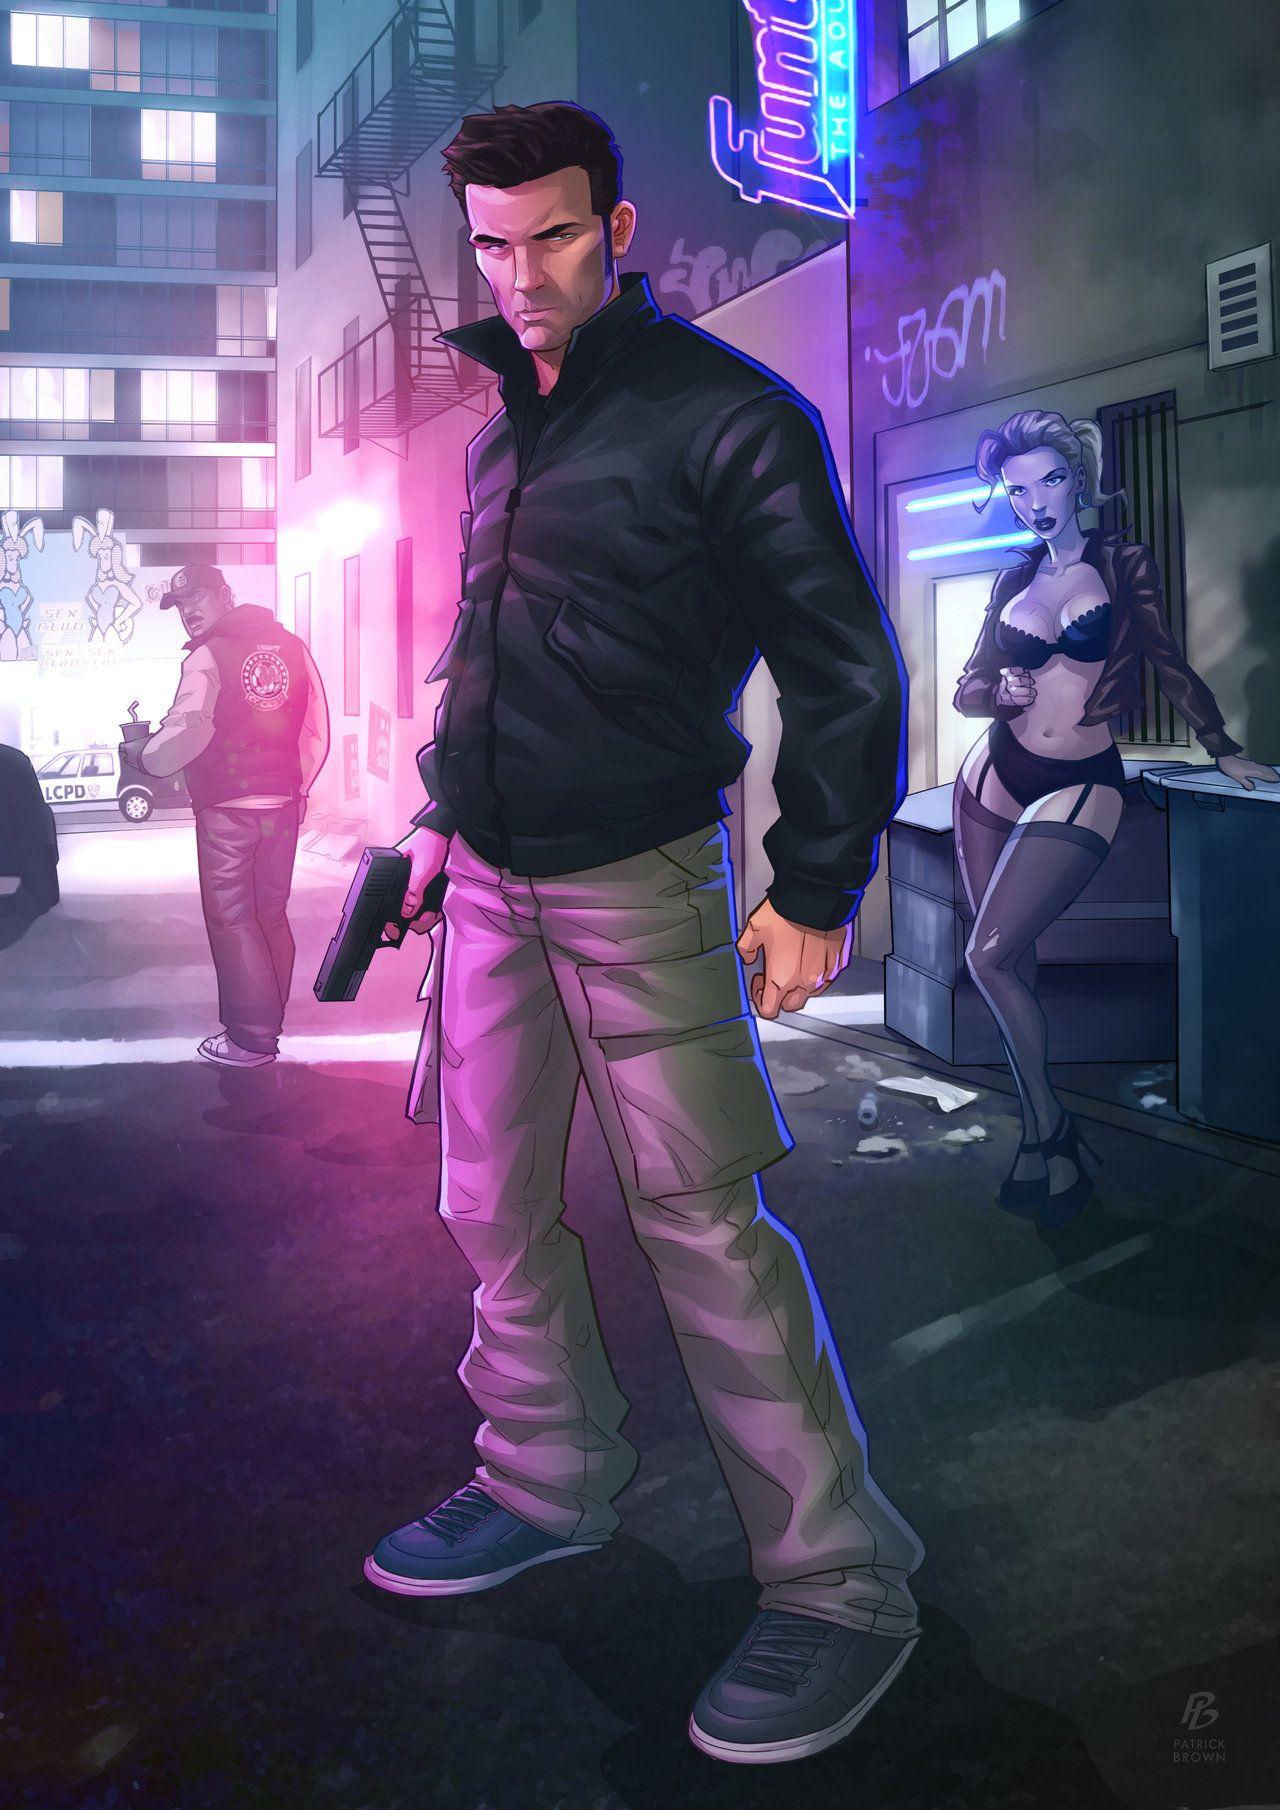 Michael #GTA #iPhone5 #Wallpaper. For your iPhone 5